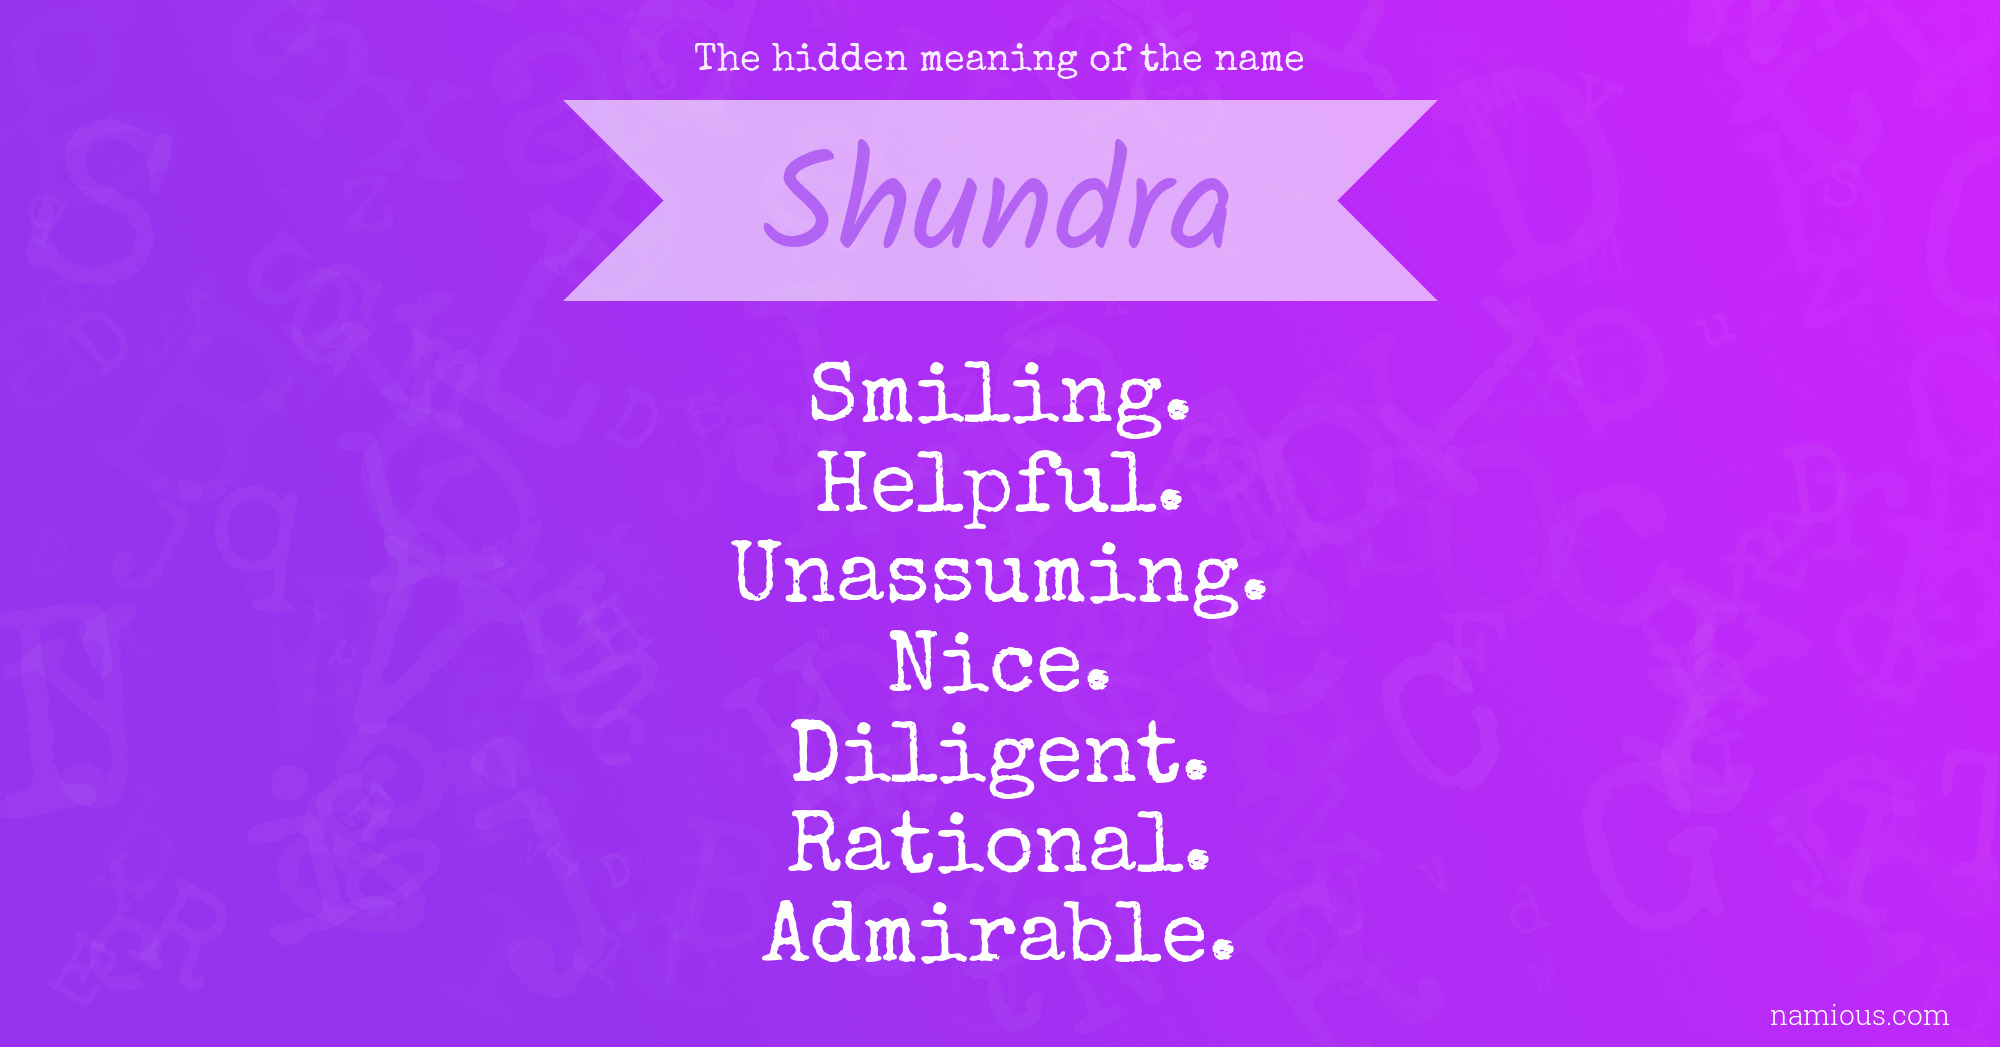 The hidden meaning of the name Shundra